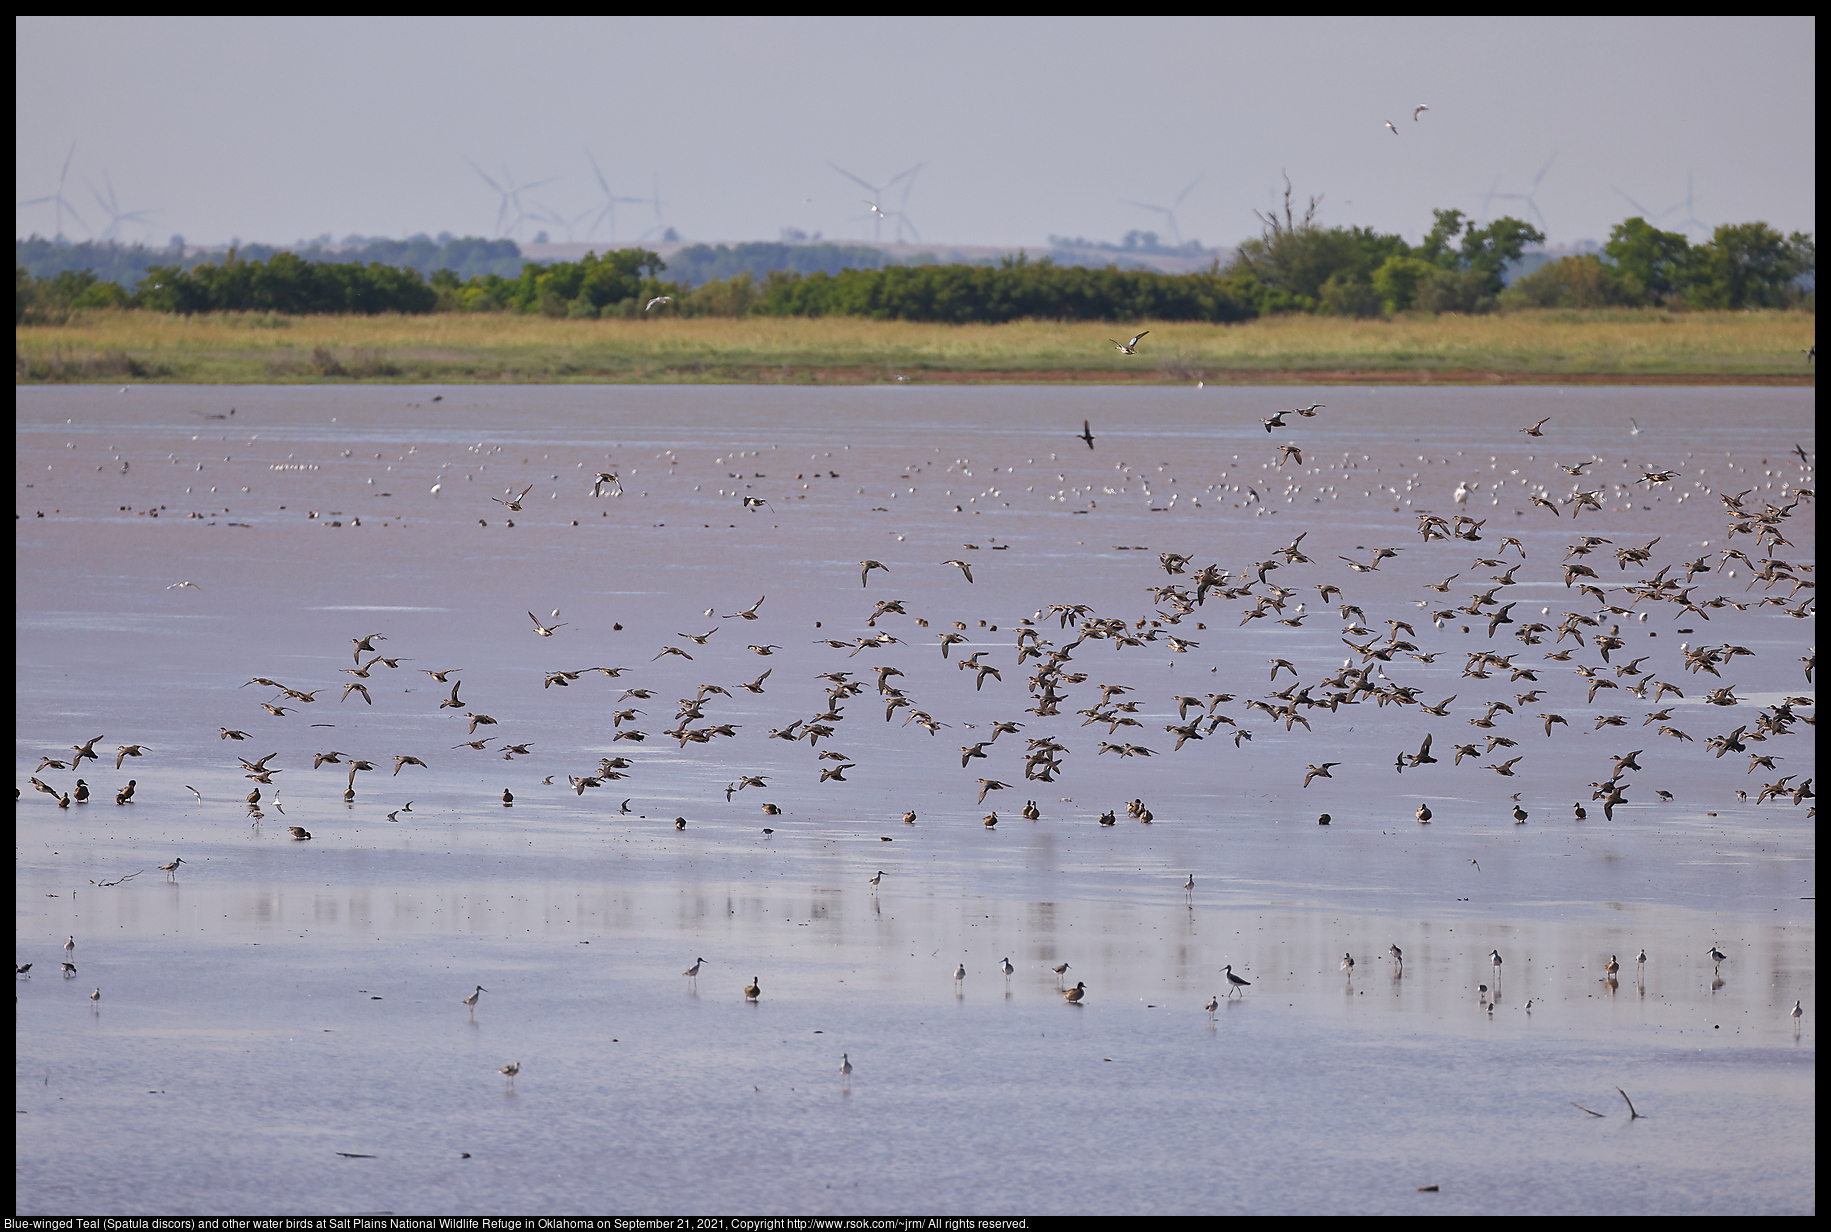 Blue-winged Teal (Spatula discors) and other water birds at Salt Plains National Wildlife Refuge in Oklahoma on September 21, 2021